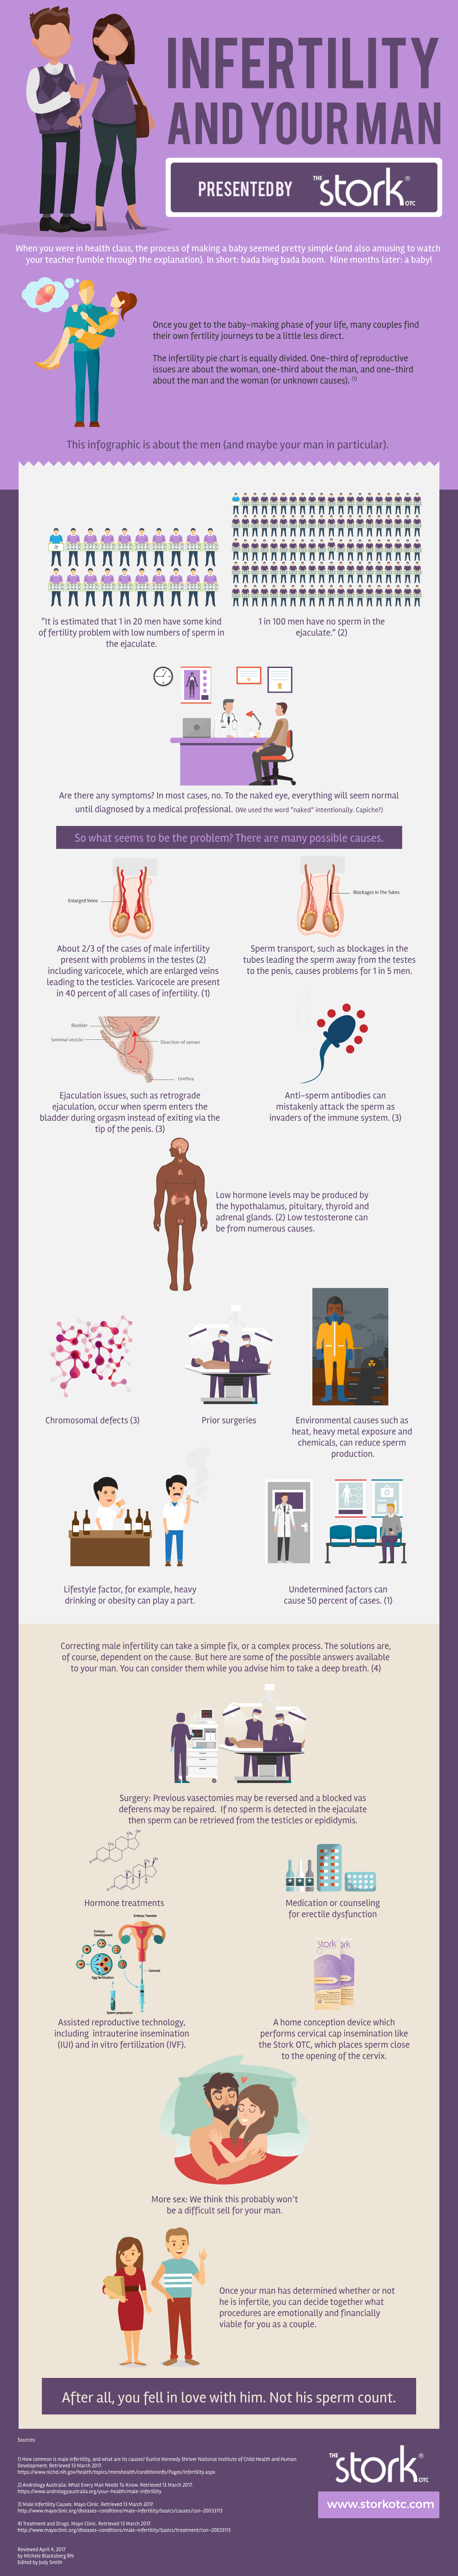 Infographic Fertility And Your Man 